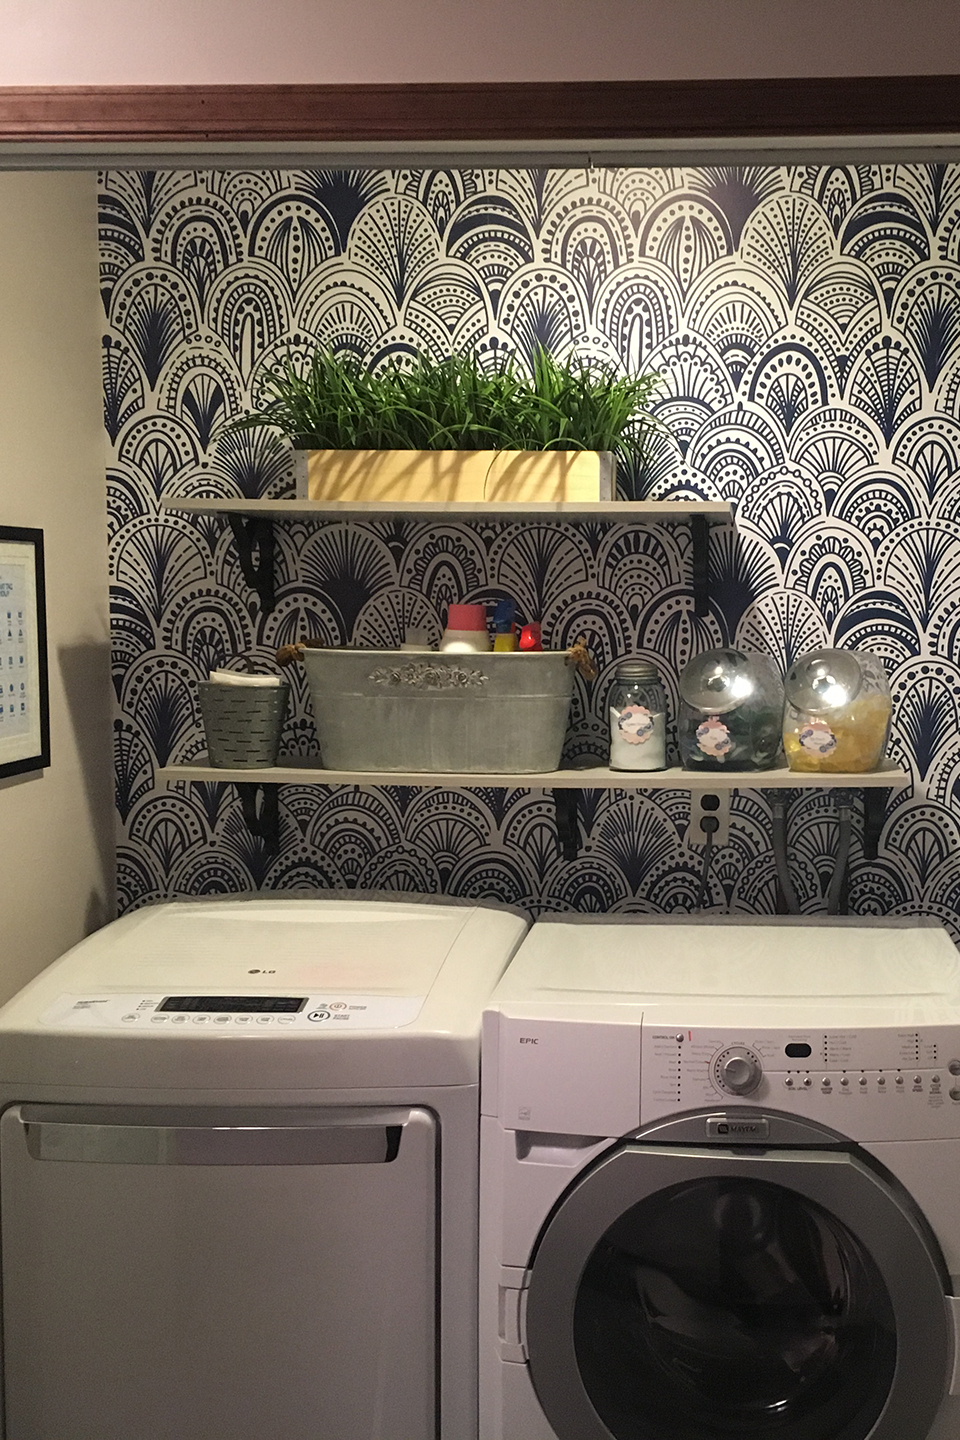 Neatly organized laundry closet with shelves and wallpaper